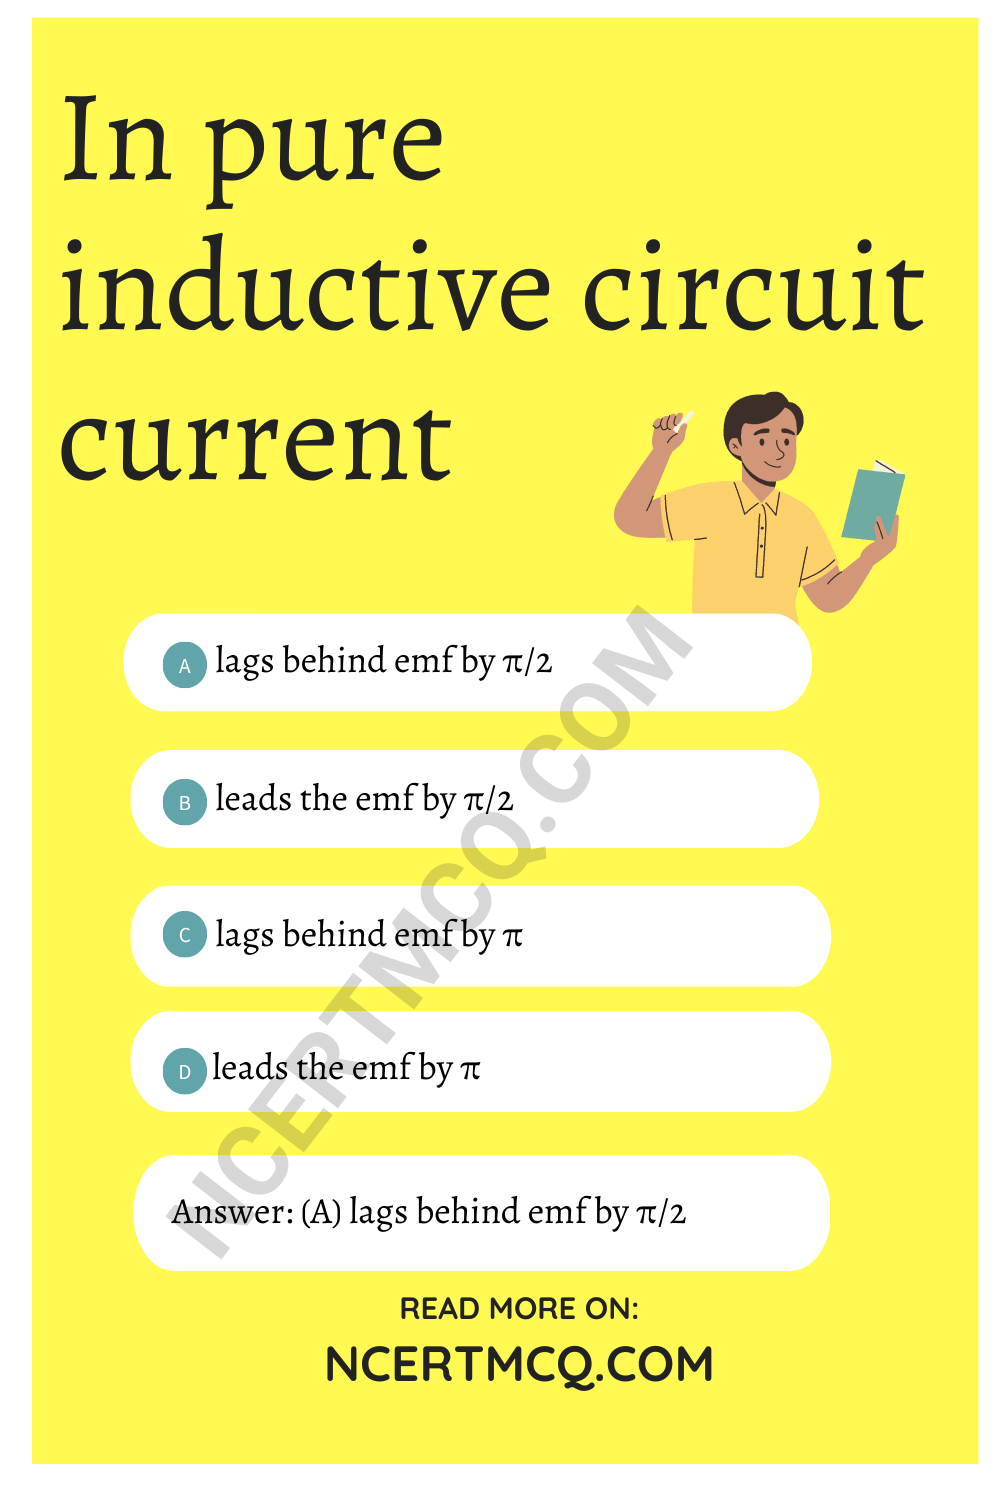 In pure inductive circuit current